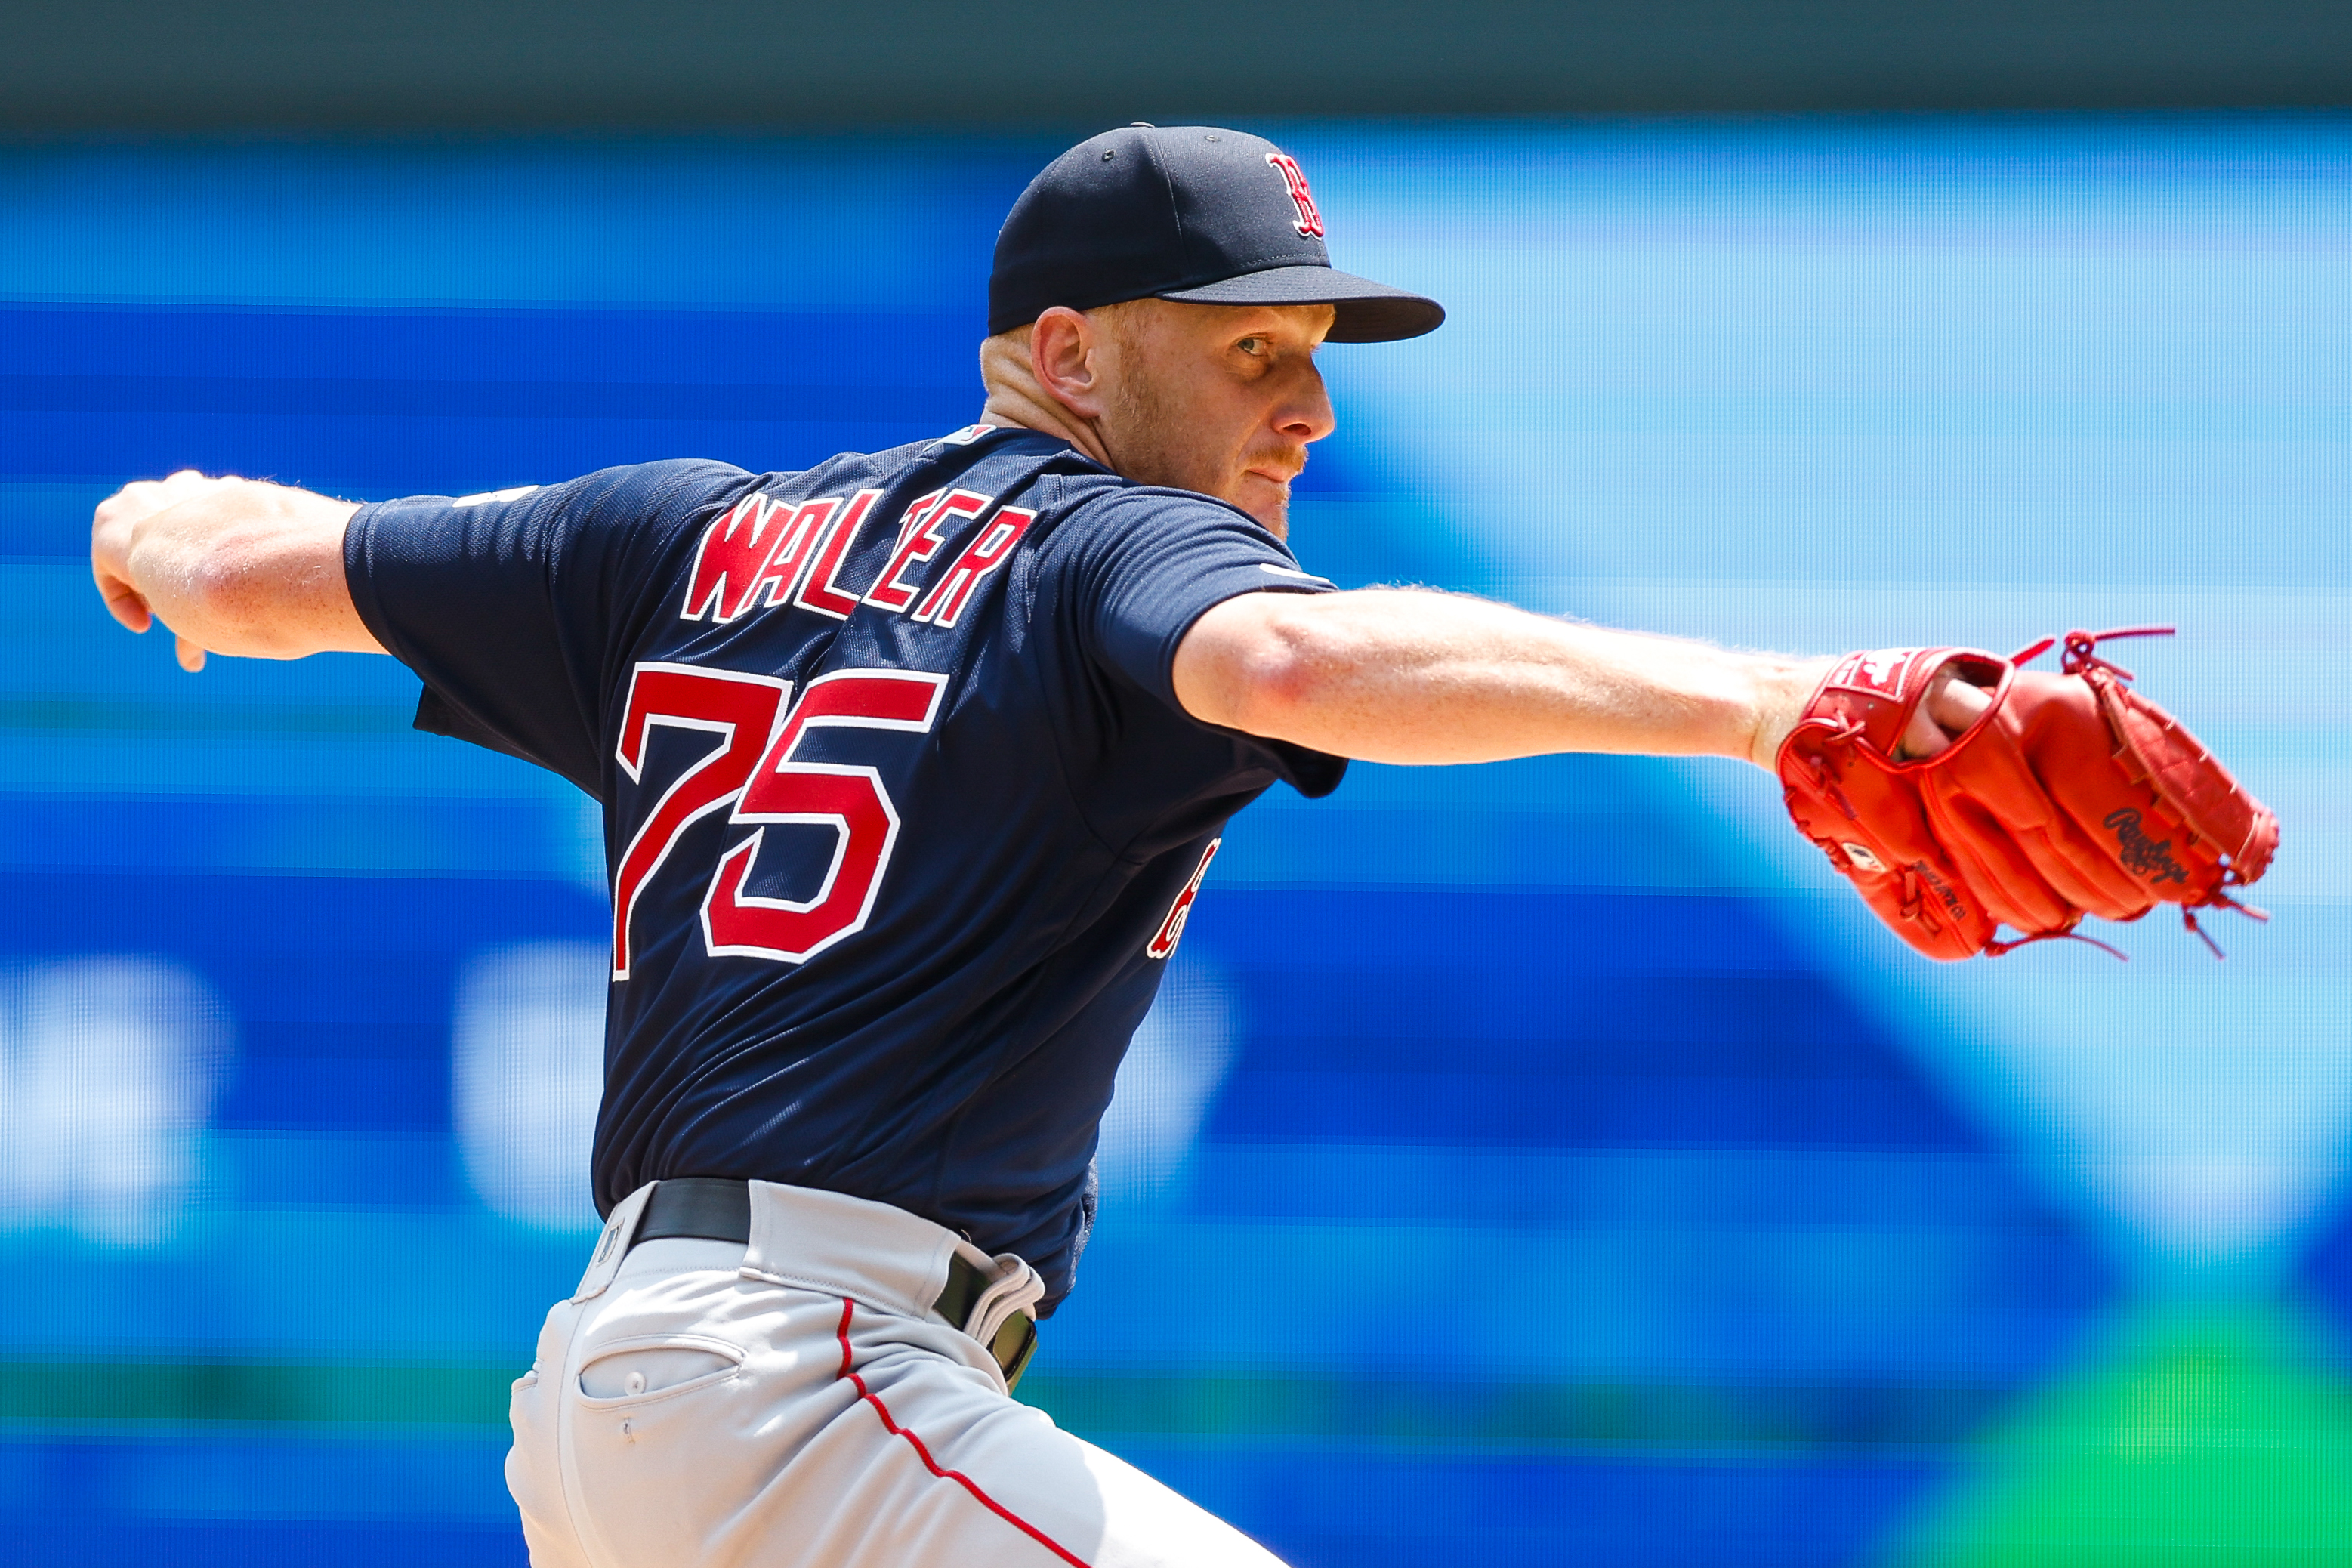 Joe Ryan goes the distance to lead Twins past Red Sox, 6-0 – Twin